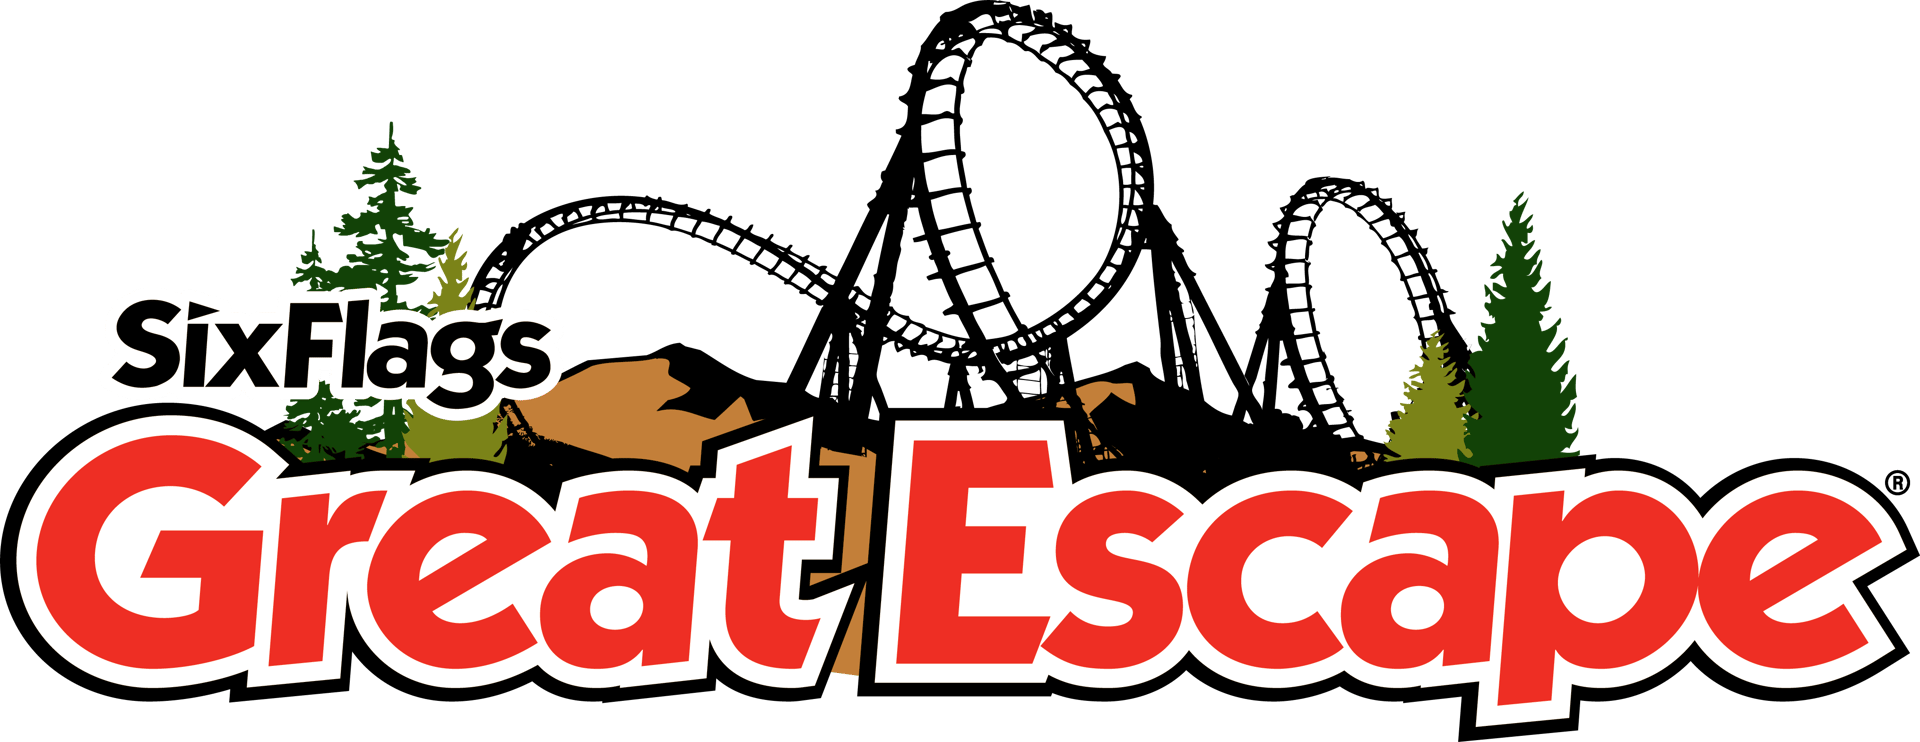 cost of great escape tickets